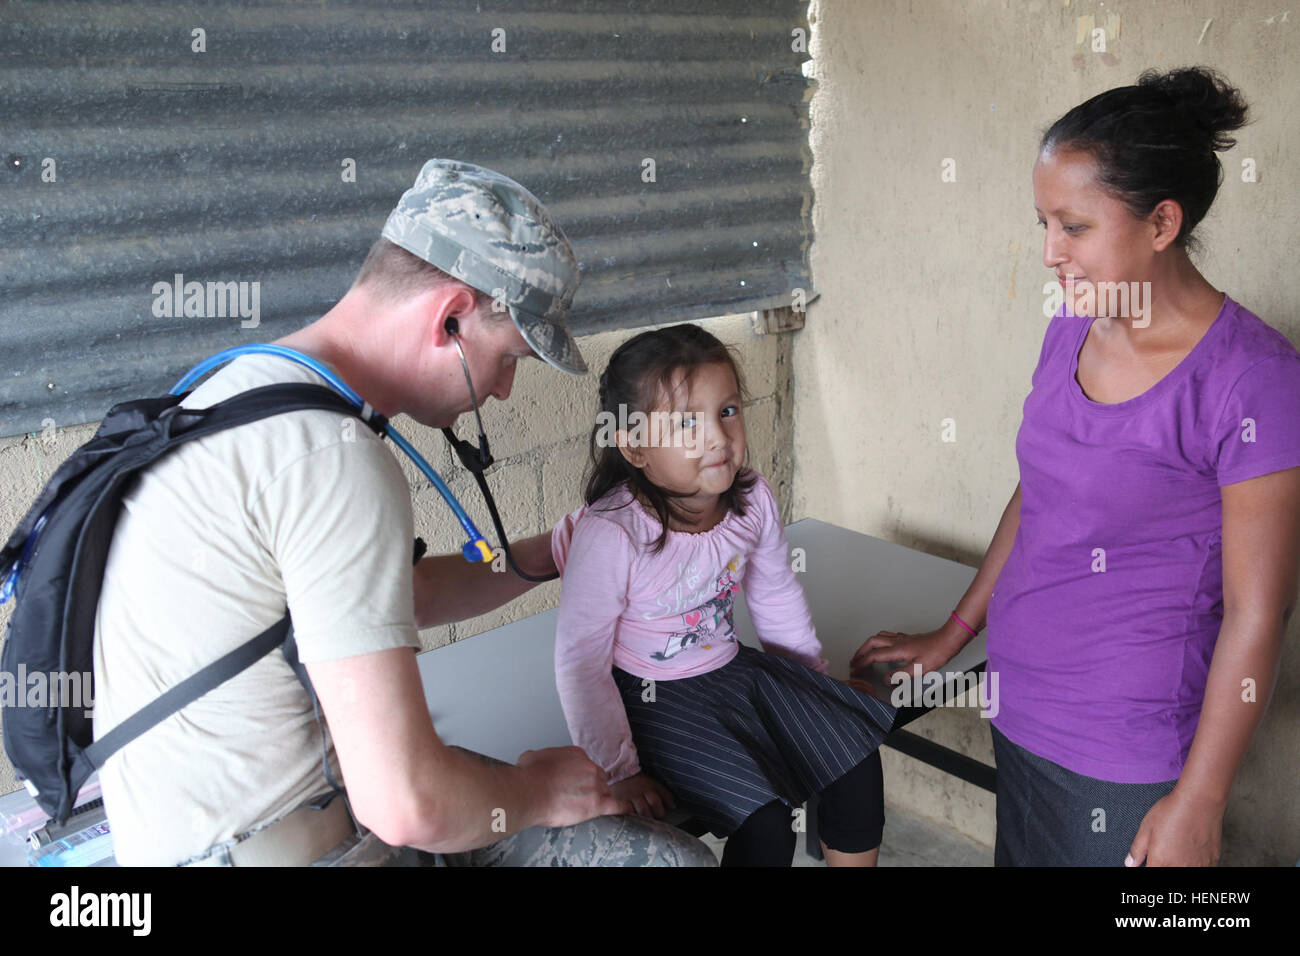 US Air Force Cpt. Charles Pace, assigned to 42nd Medical Group, examines a Guatemalan child during a Medical Readiness Training Exercise during Beyond the Horizon 2014, Zacapa, Guatemala, Apr. 21, 2014. Beyond the Horizon is an annual exercise that embraces the partnership between the United States and Guatemala, to provide focused humanitarian assistance through various medical, dental, and civic action programs. (U.S. Army photo by Spc. Gary Silverman)(Released) Beyond the Horizon 2014, Guatemala 140421-A-TO648-220 Stock Photo